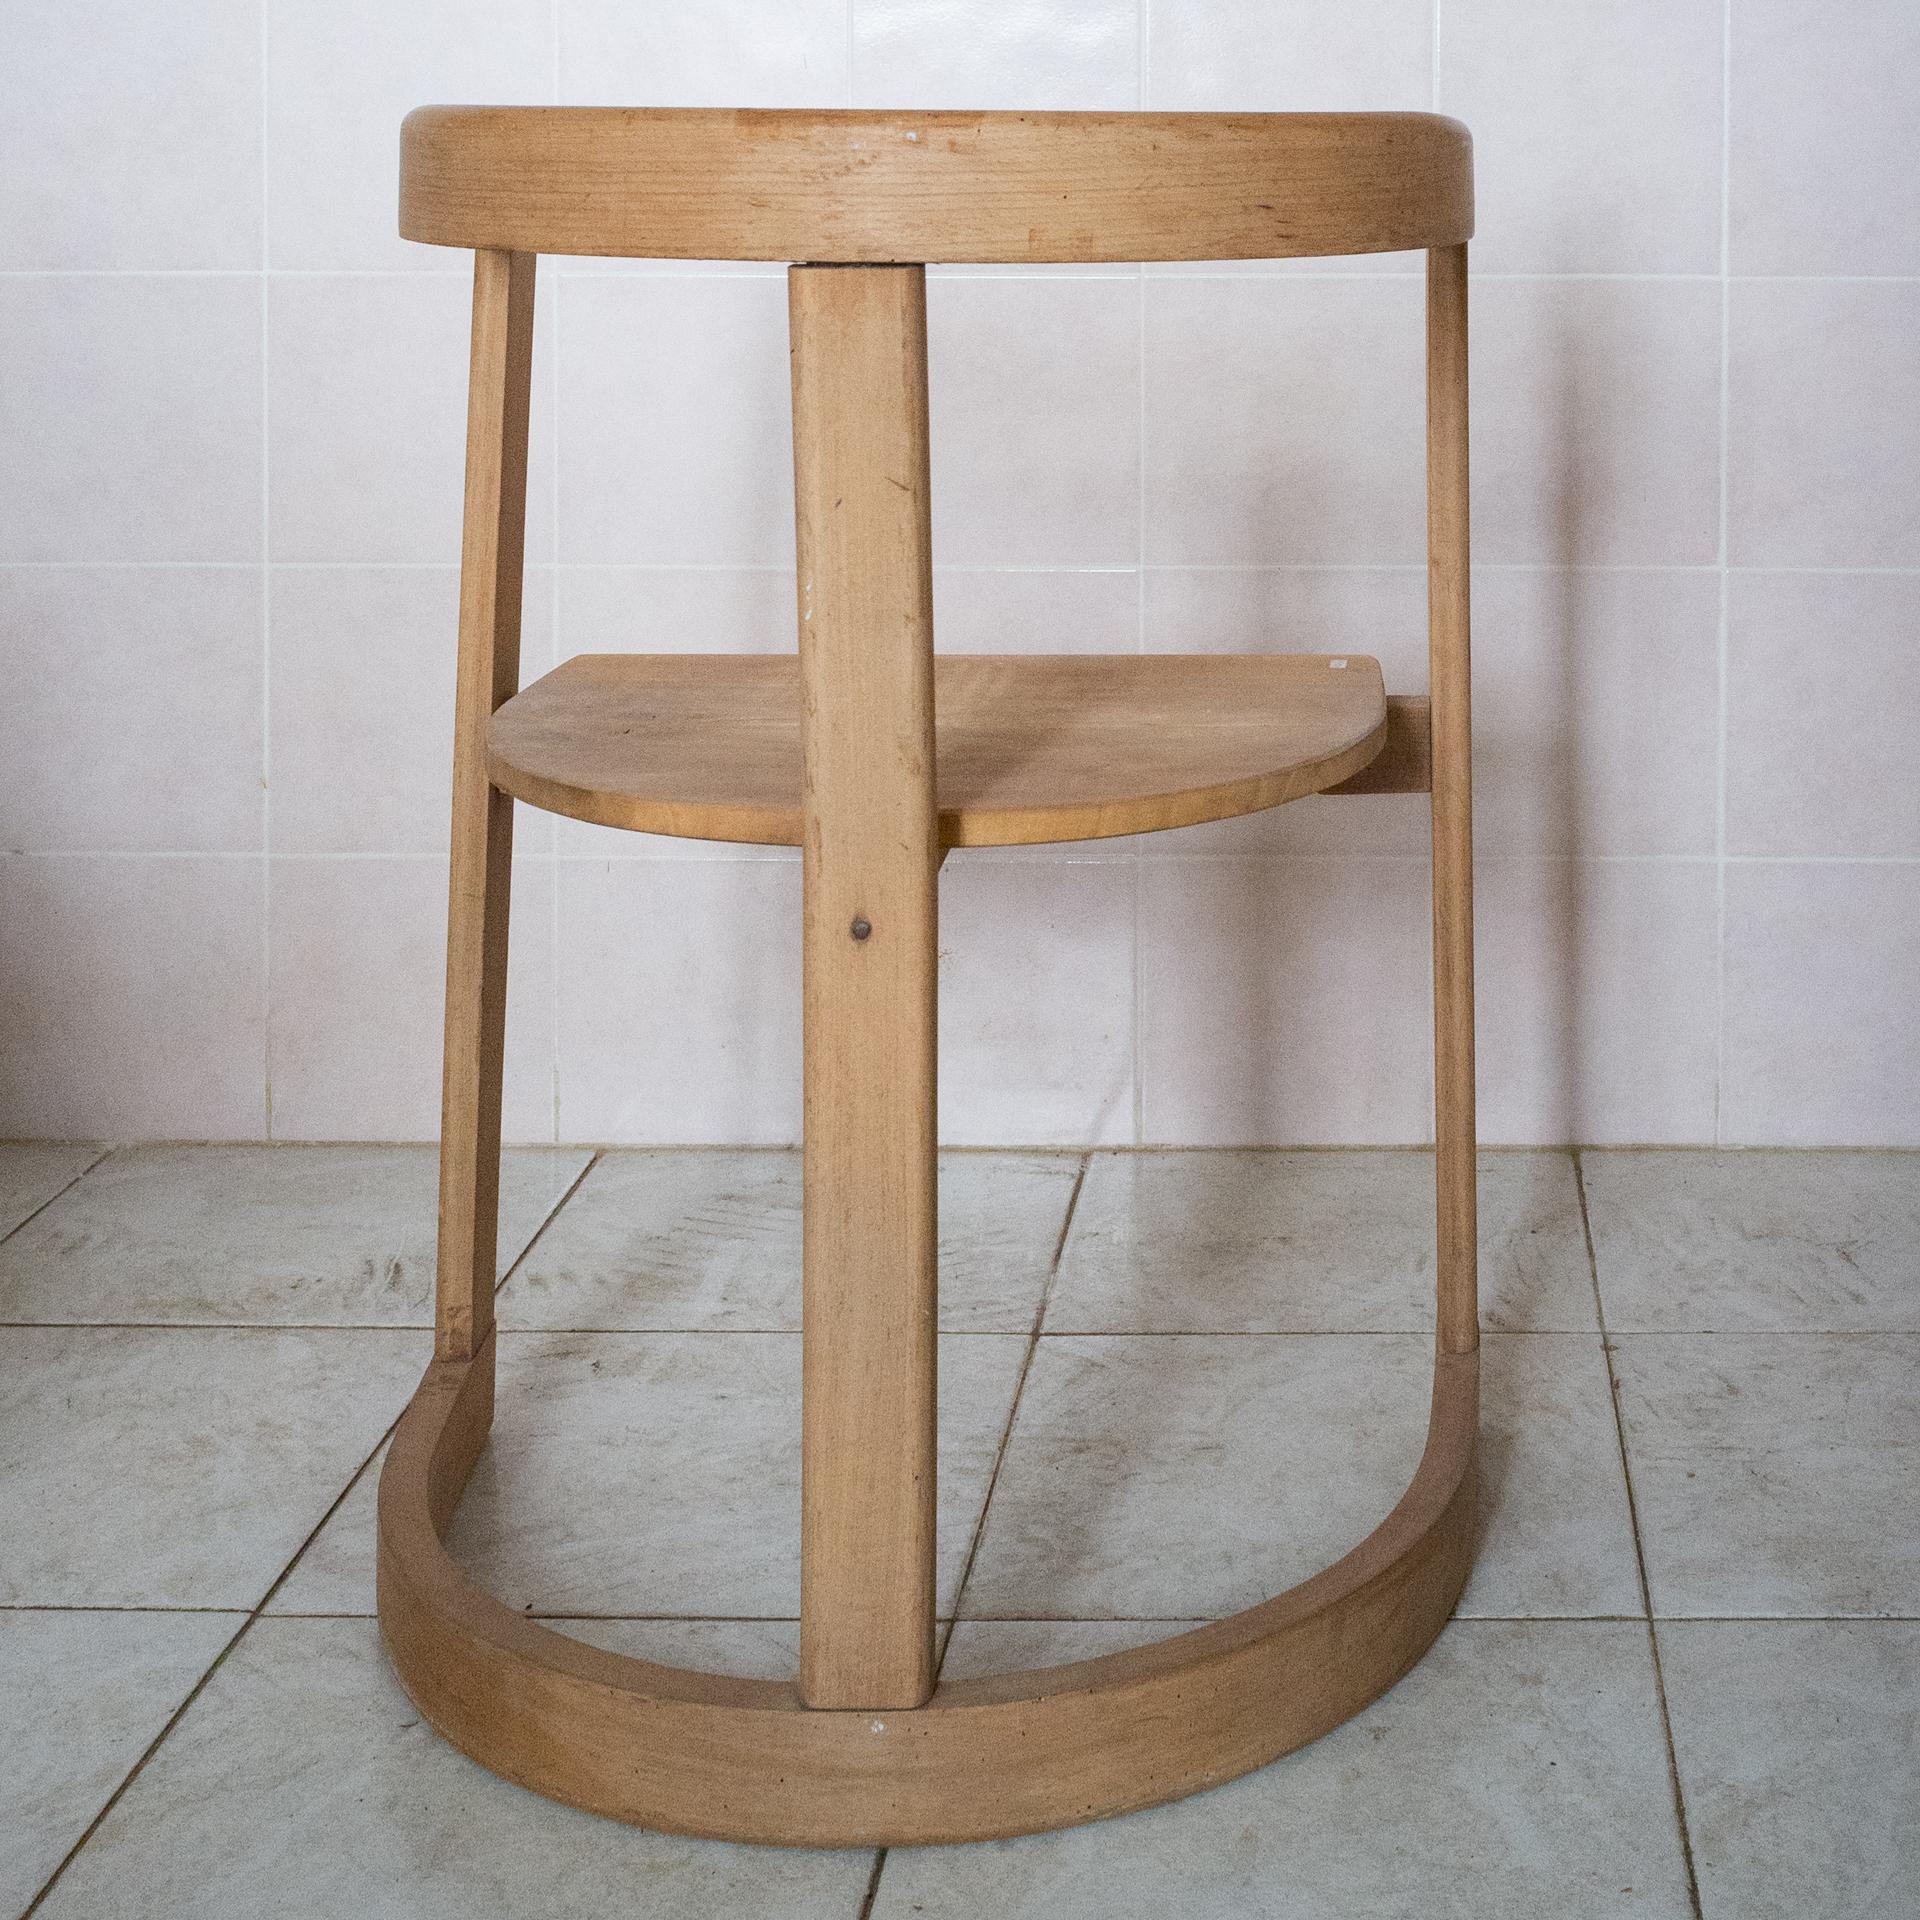 Italian Wooden Prototype of a Chair For Sale